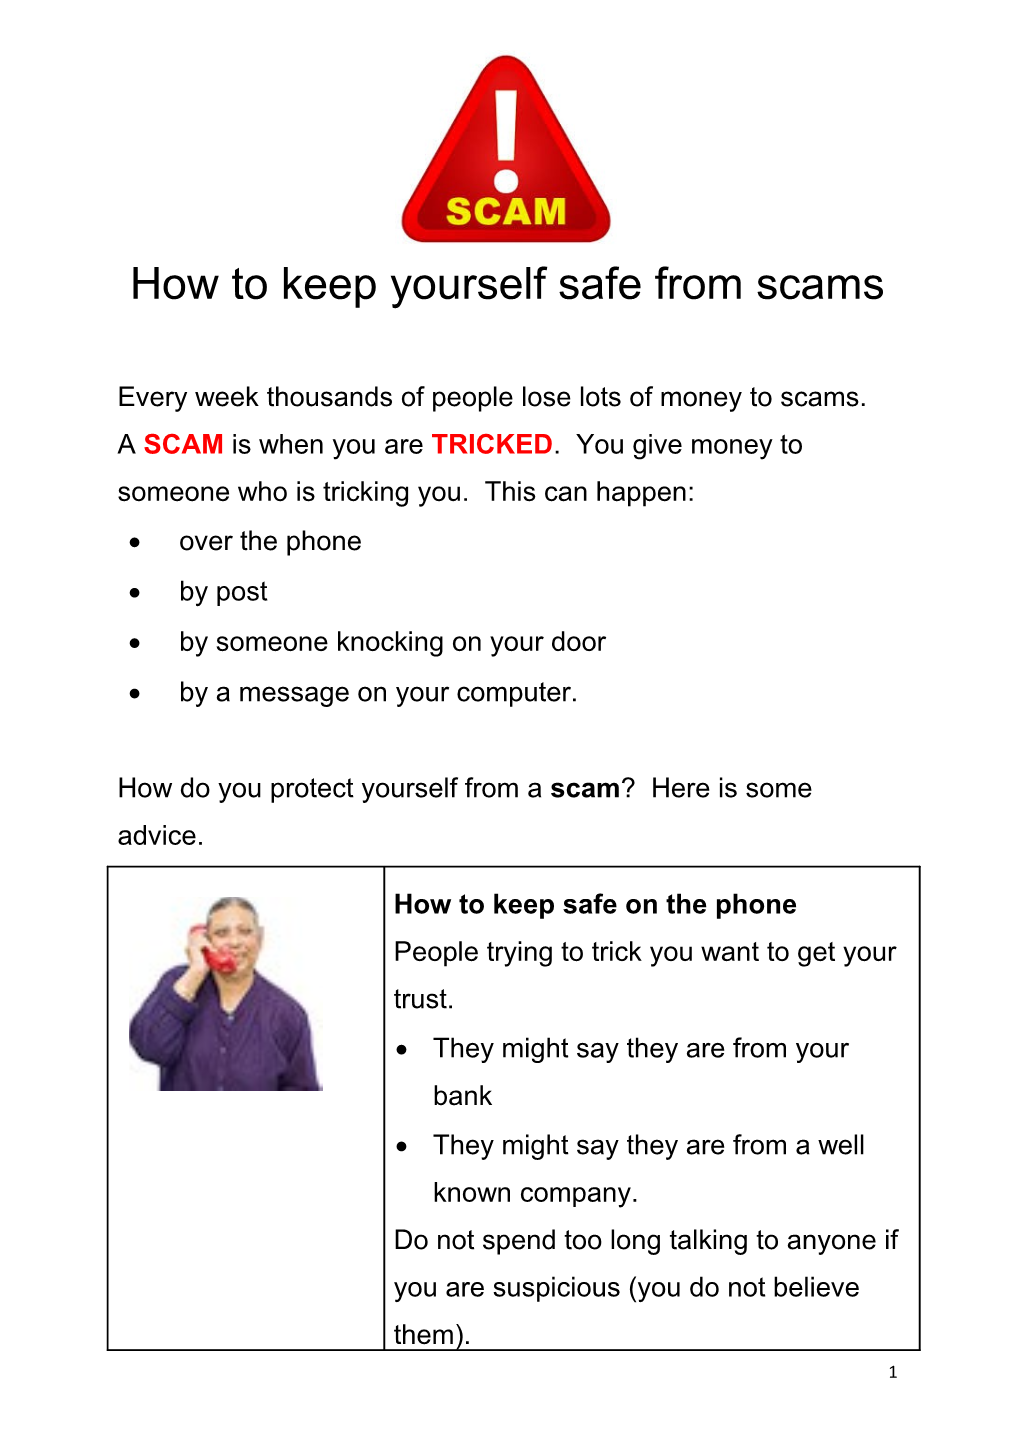 How to Protect Yourself from SCAMS